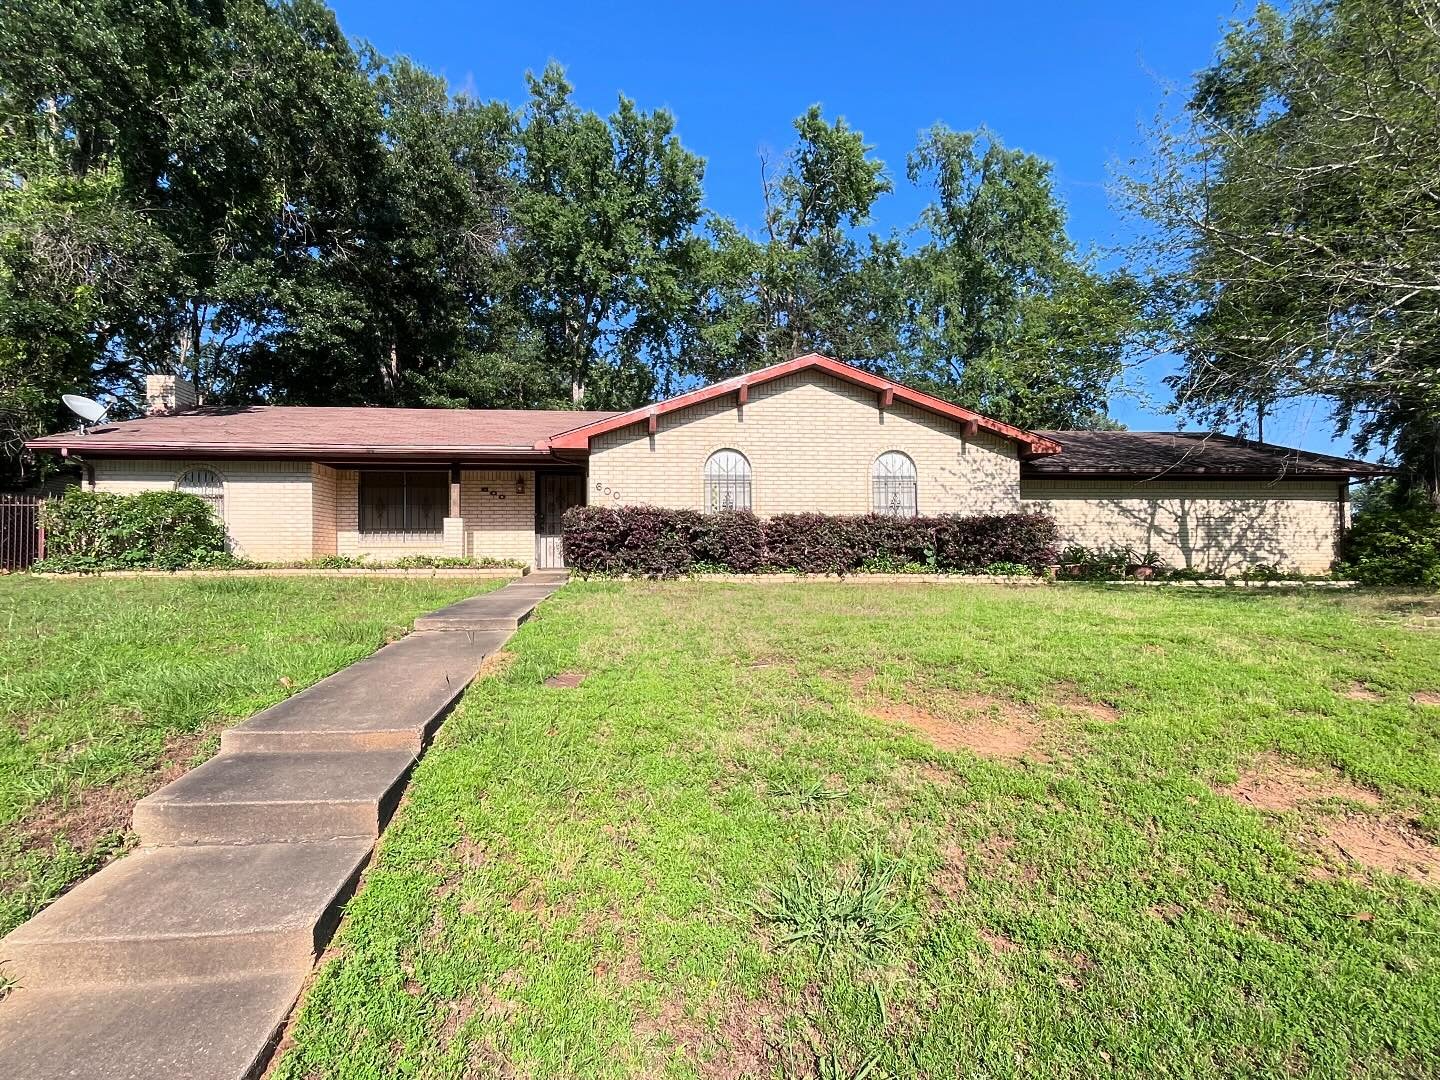 FIRST TIME ON THE MARKET IN 25 YEARS ‼️

📍 600 Deerwood
👟 1,572 sq ft
✏️ Pine Tree ISD
💰 $206,100

Let&rsquo;s talk about the potential this home has and get serious about all this home offers! Think about what this home could be with just a fresh